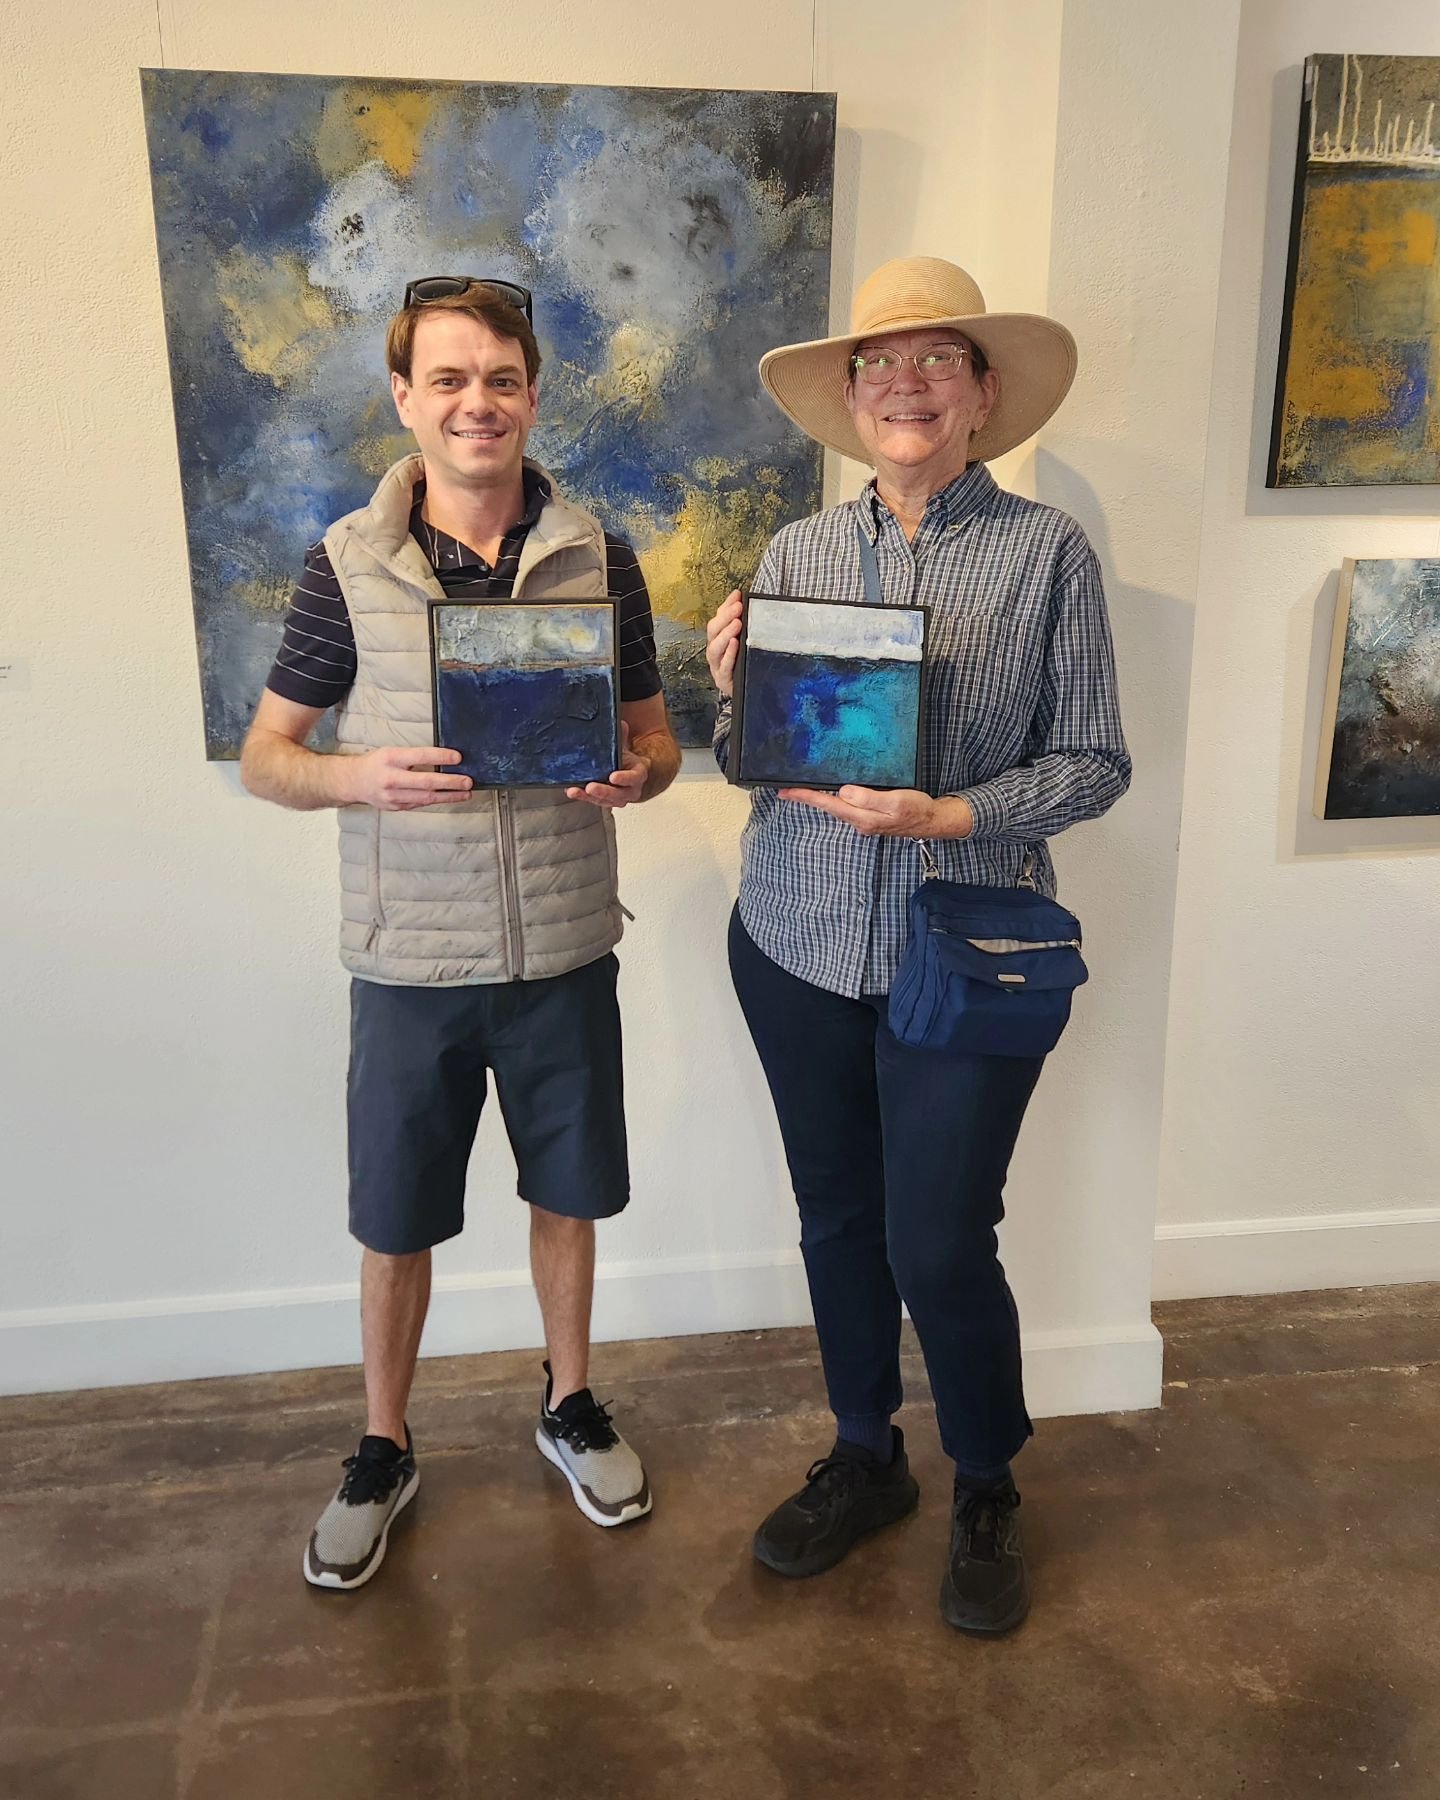 SOLD 🔴

My Abstract Seascapes #1 &amp; #2 have sold! 

Thank you, so much Ann! It was such a pleasure meeting you today and I am so happy these paintings now have a home. 🏡

#Grateful #ArtAppreciation #SoldArt #LucasSmithArt #SoloExhibition #Galler